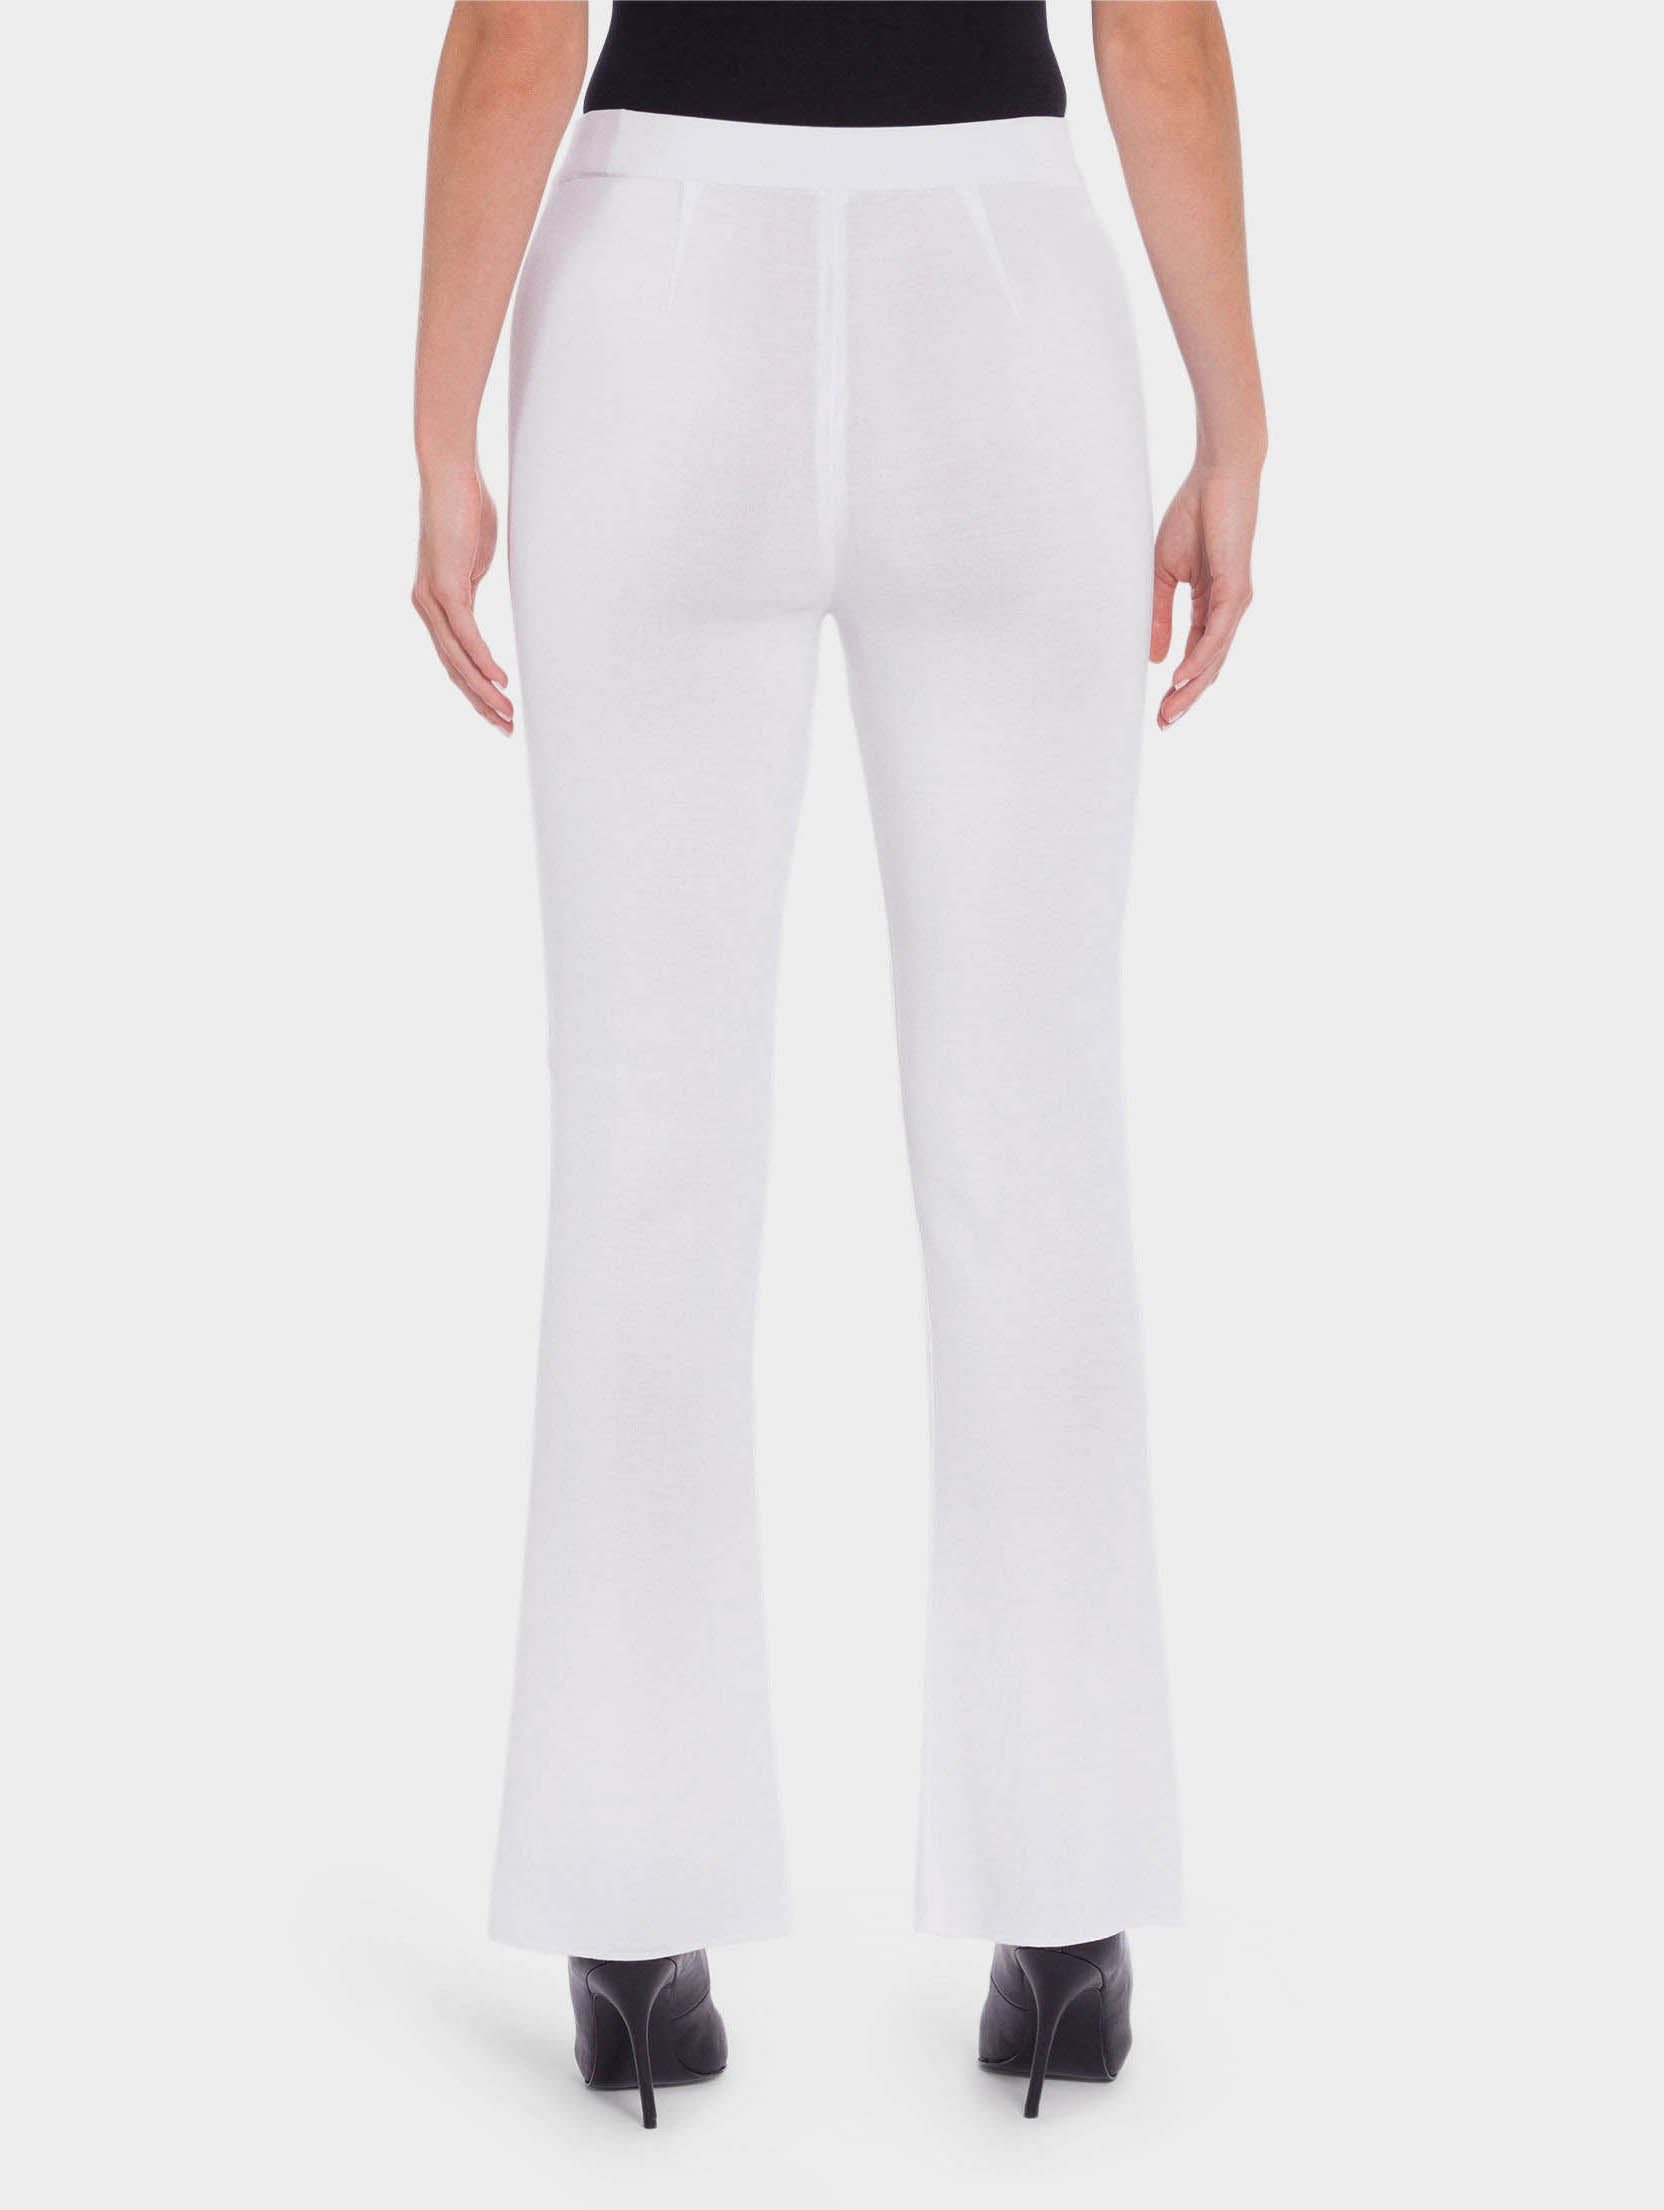 Cello Women's Juniors Stretchy Mid Rise Skinny Fit Bootcut Pants (L, White)  - Walmart.com